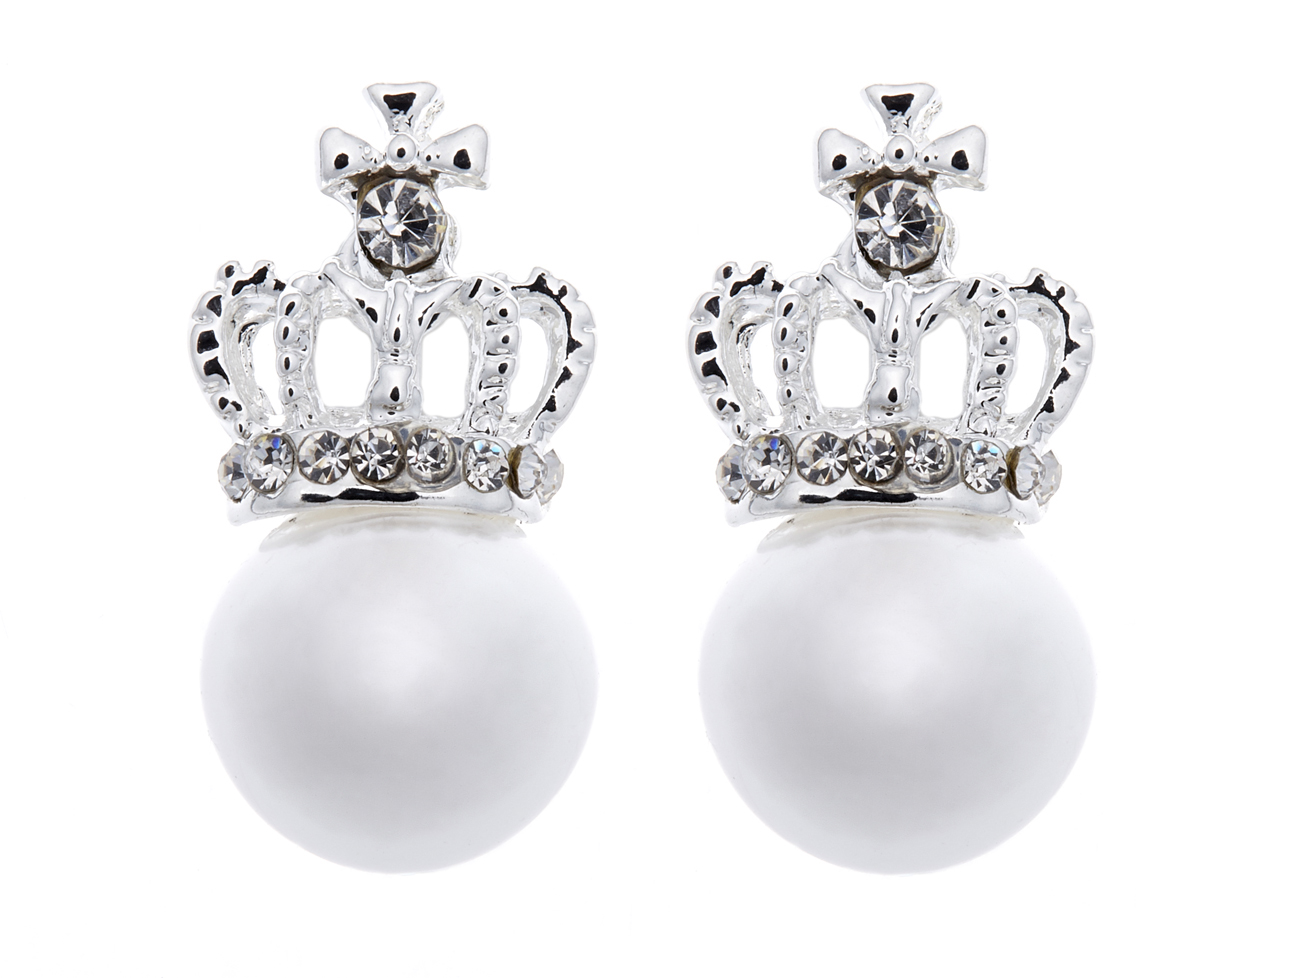 Clip On Earrings - Honor - silver crown earring with a pearl and clear crystals